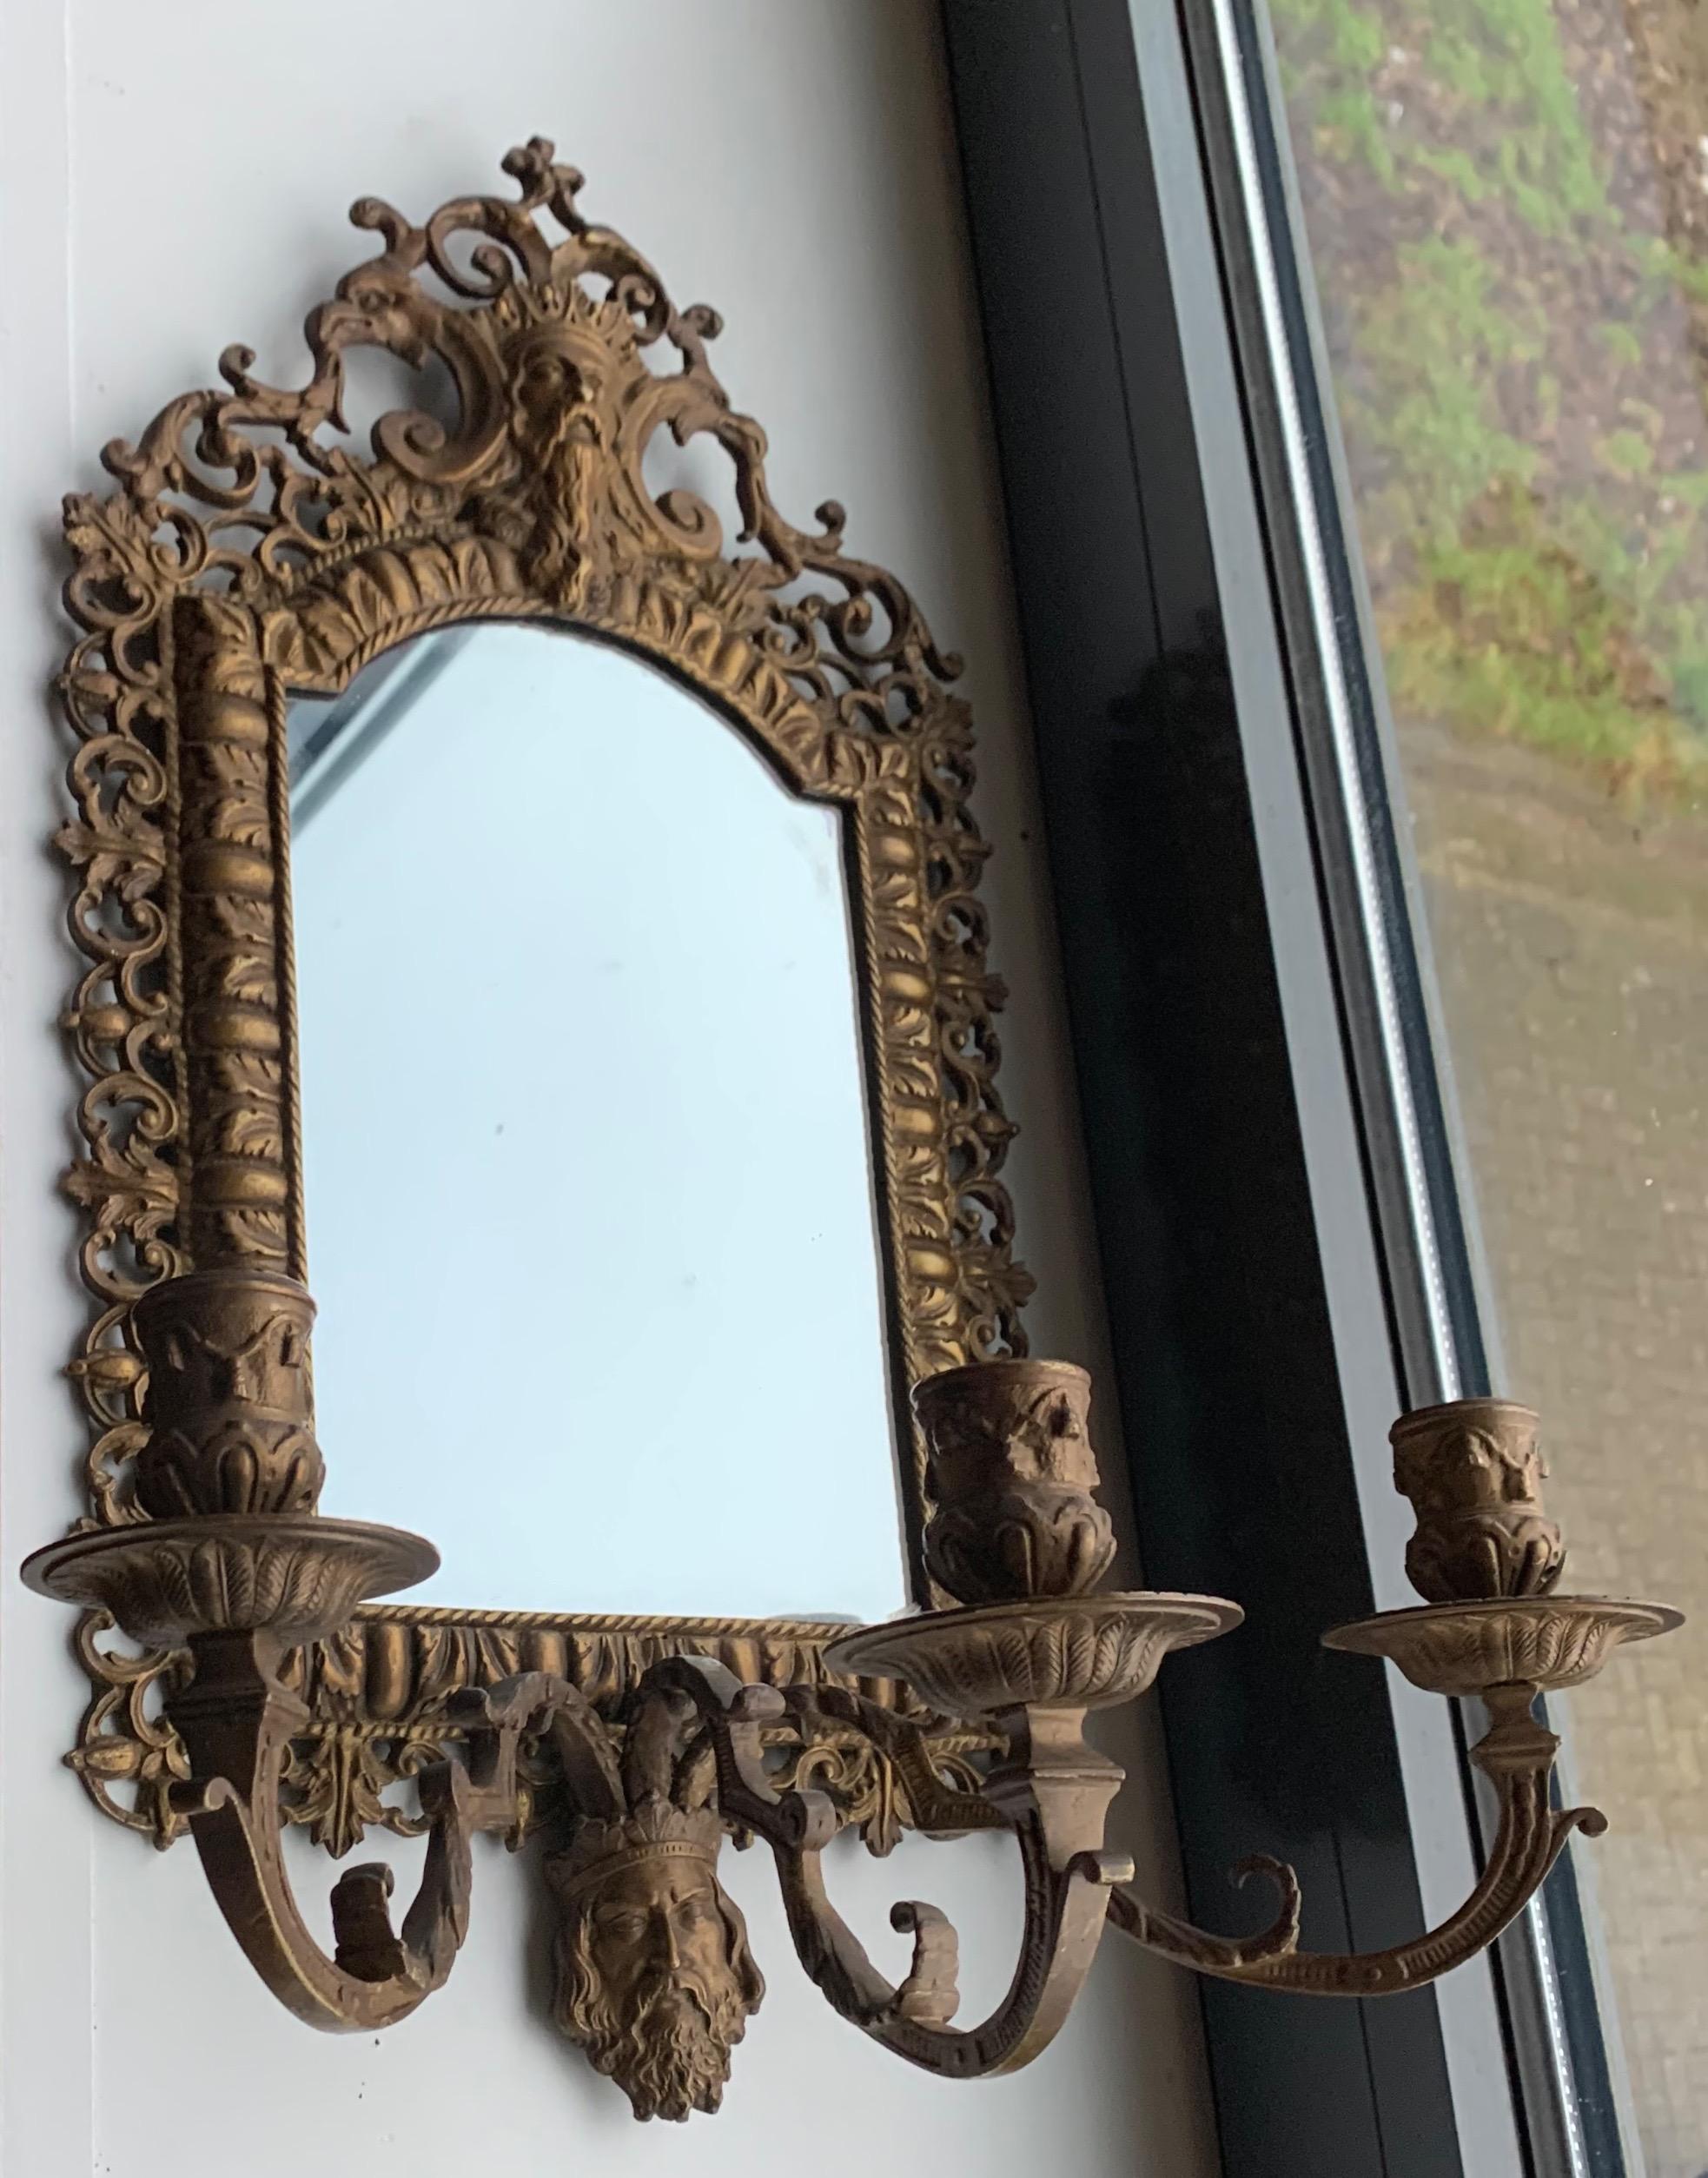 19th Century Rare Renaissance Revival Bronze Wall Mirror with Candelabras and Stunning Masks For Sale